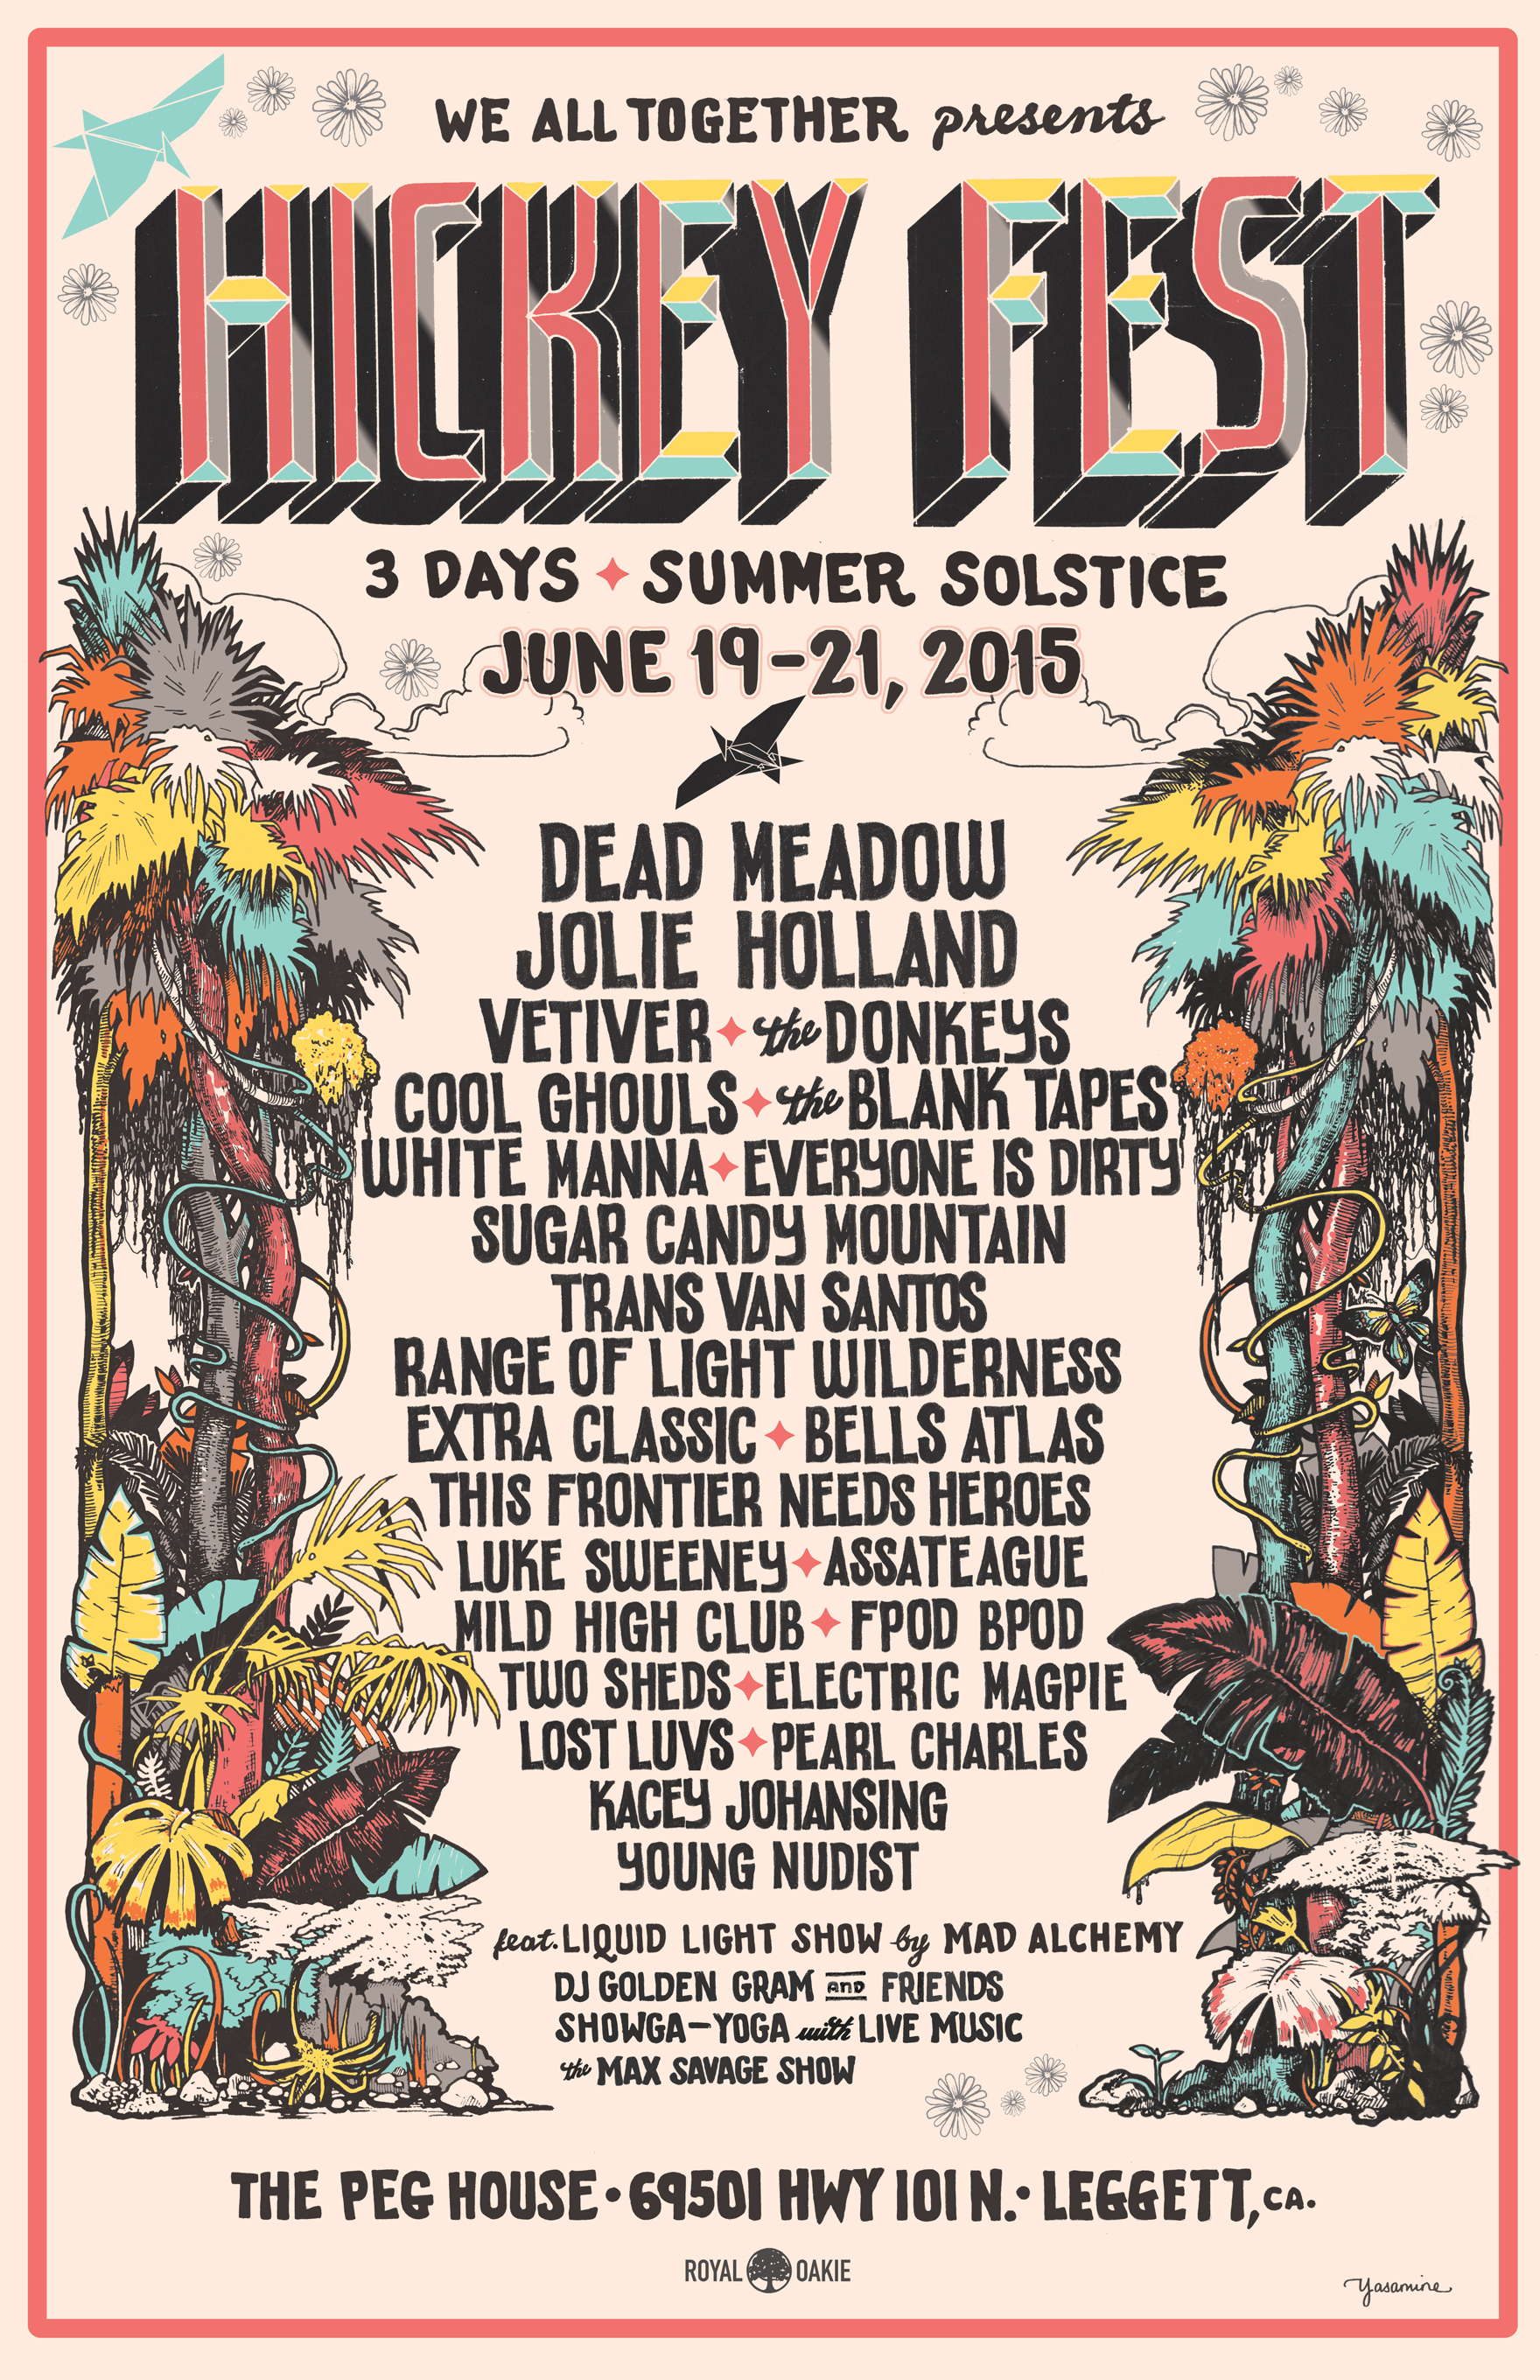 Hickey_Fest_Poster_2015_by_Yasamine_June-WEB.jpg